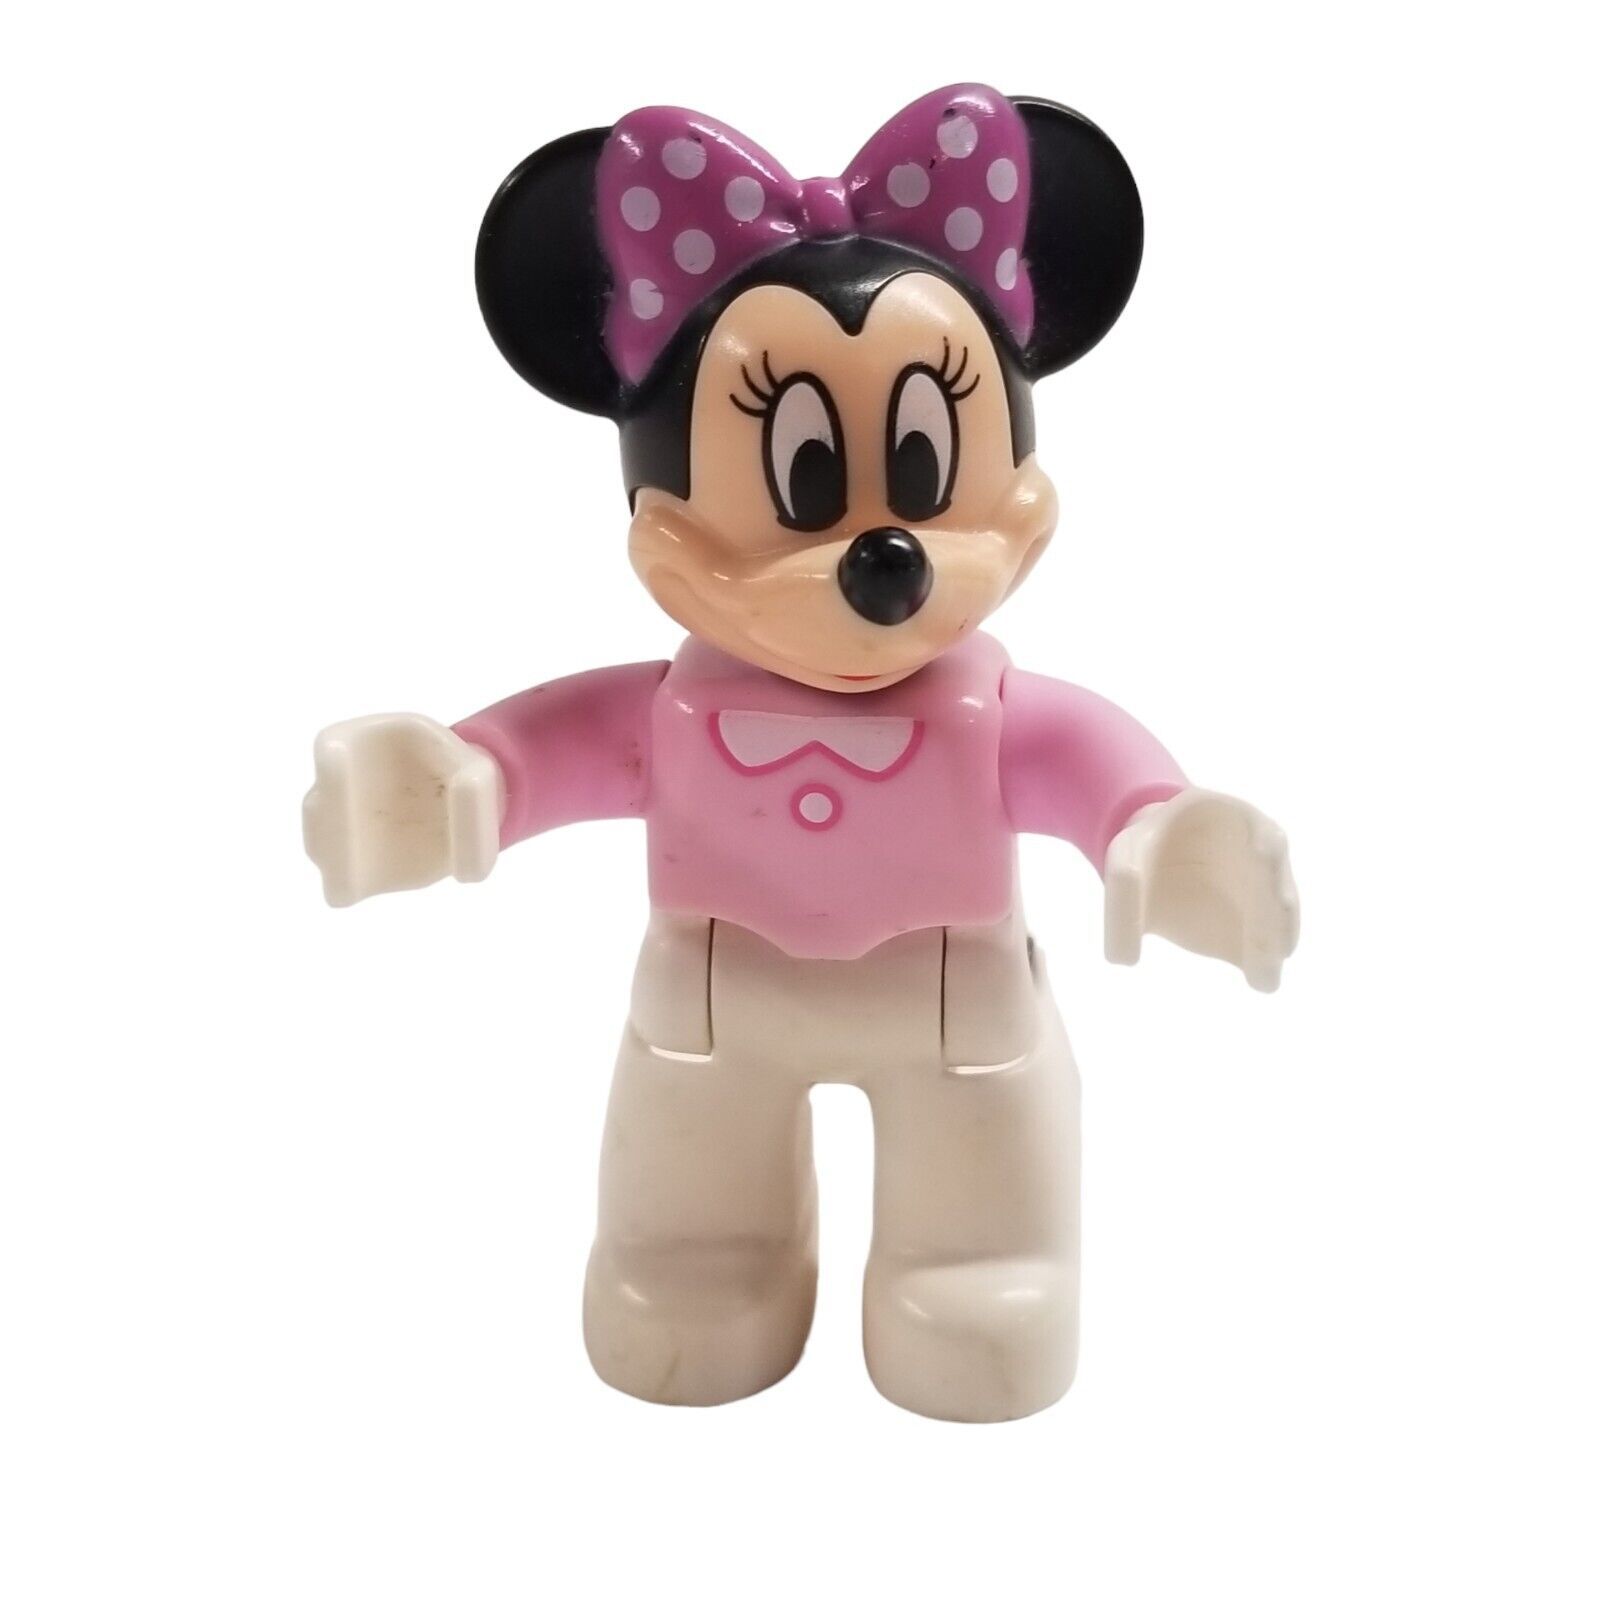 Primary image for Lego Duplo Minnie Mouse Figure Pink White Bow Mickey Walt Disney Character Toy